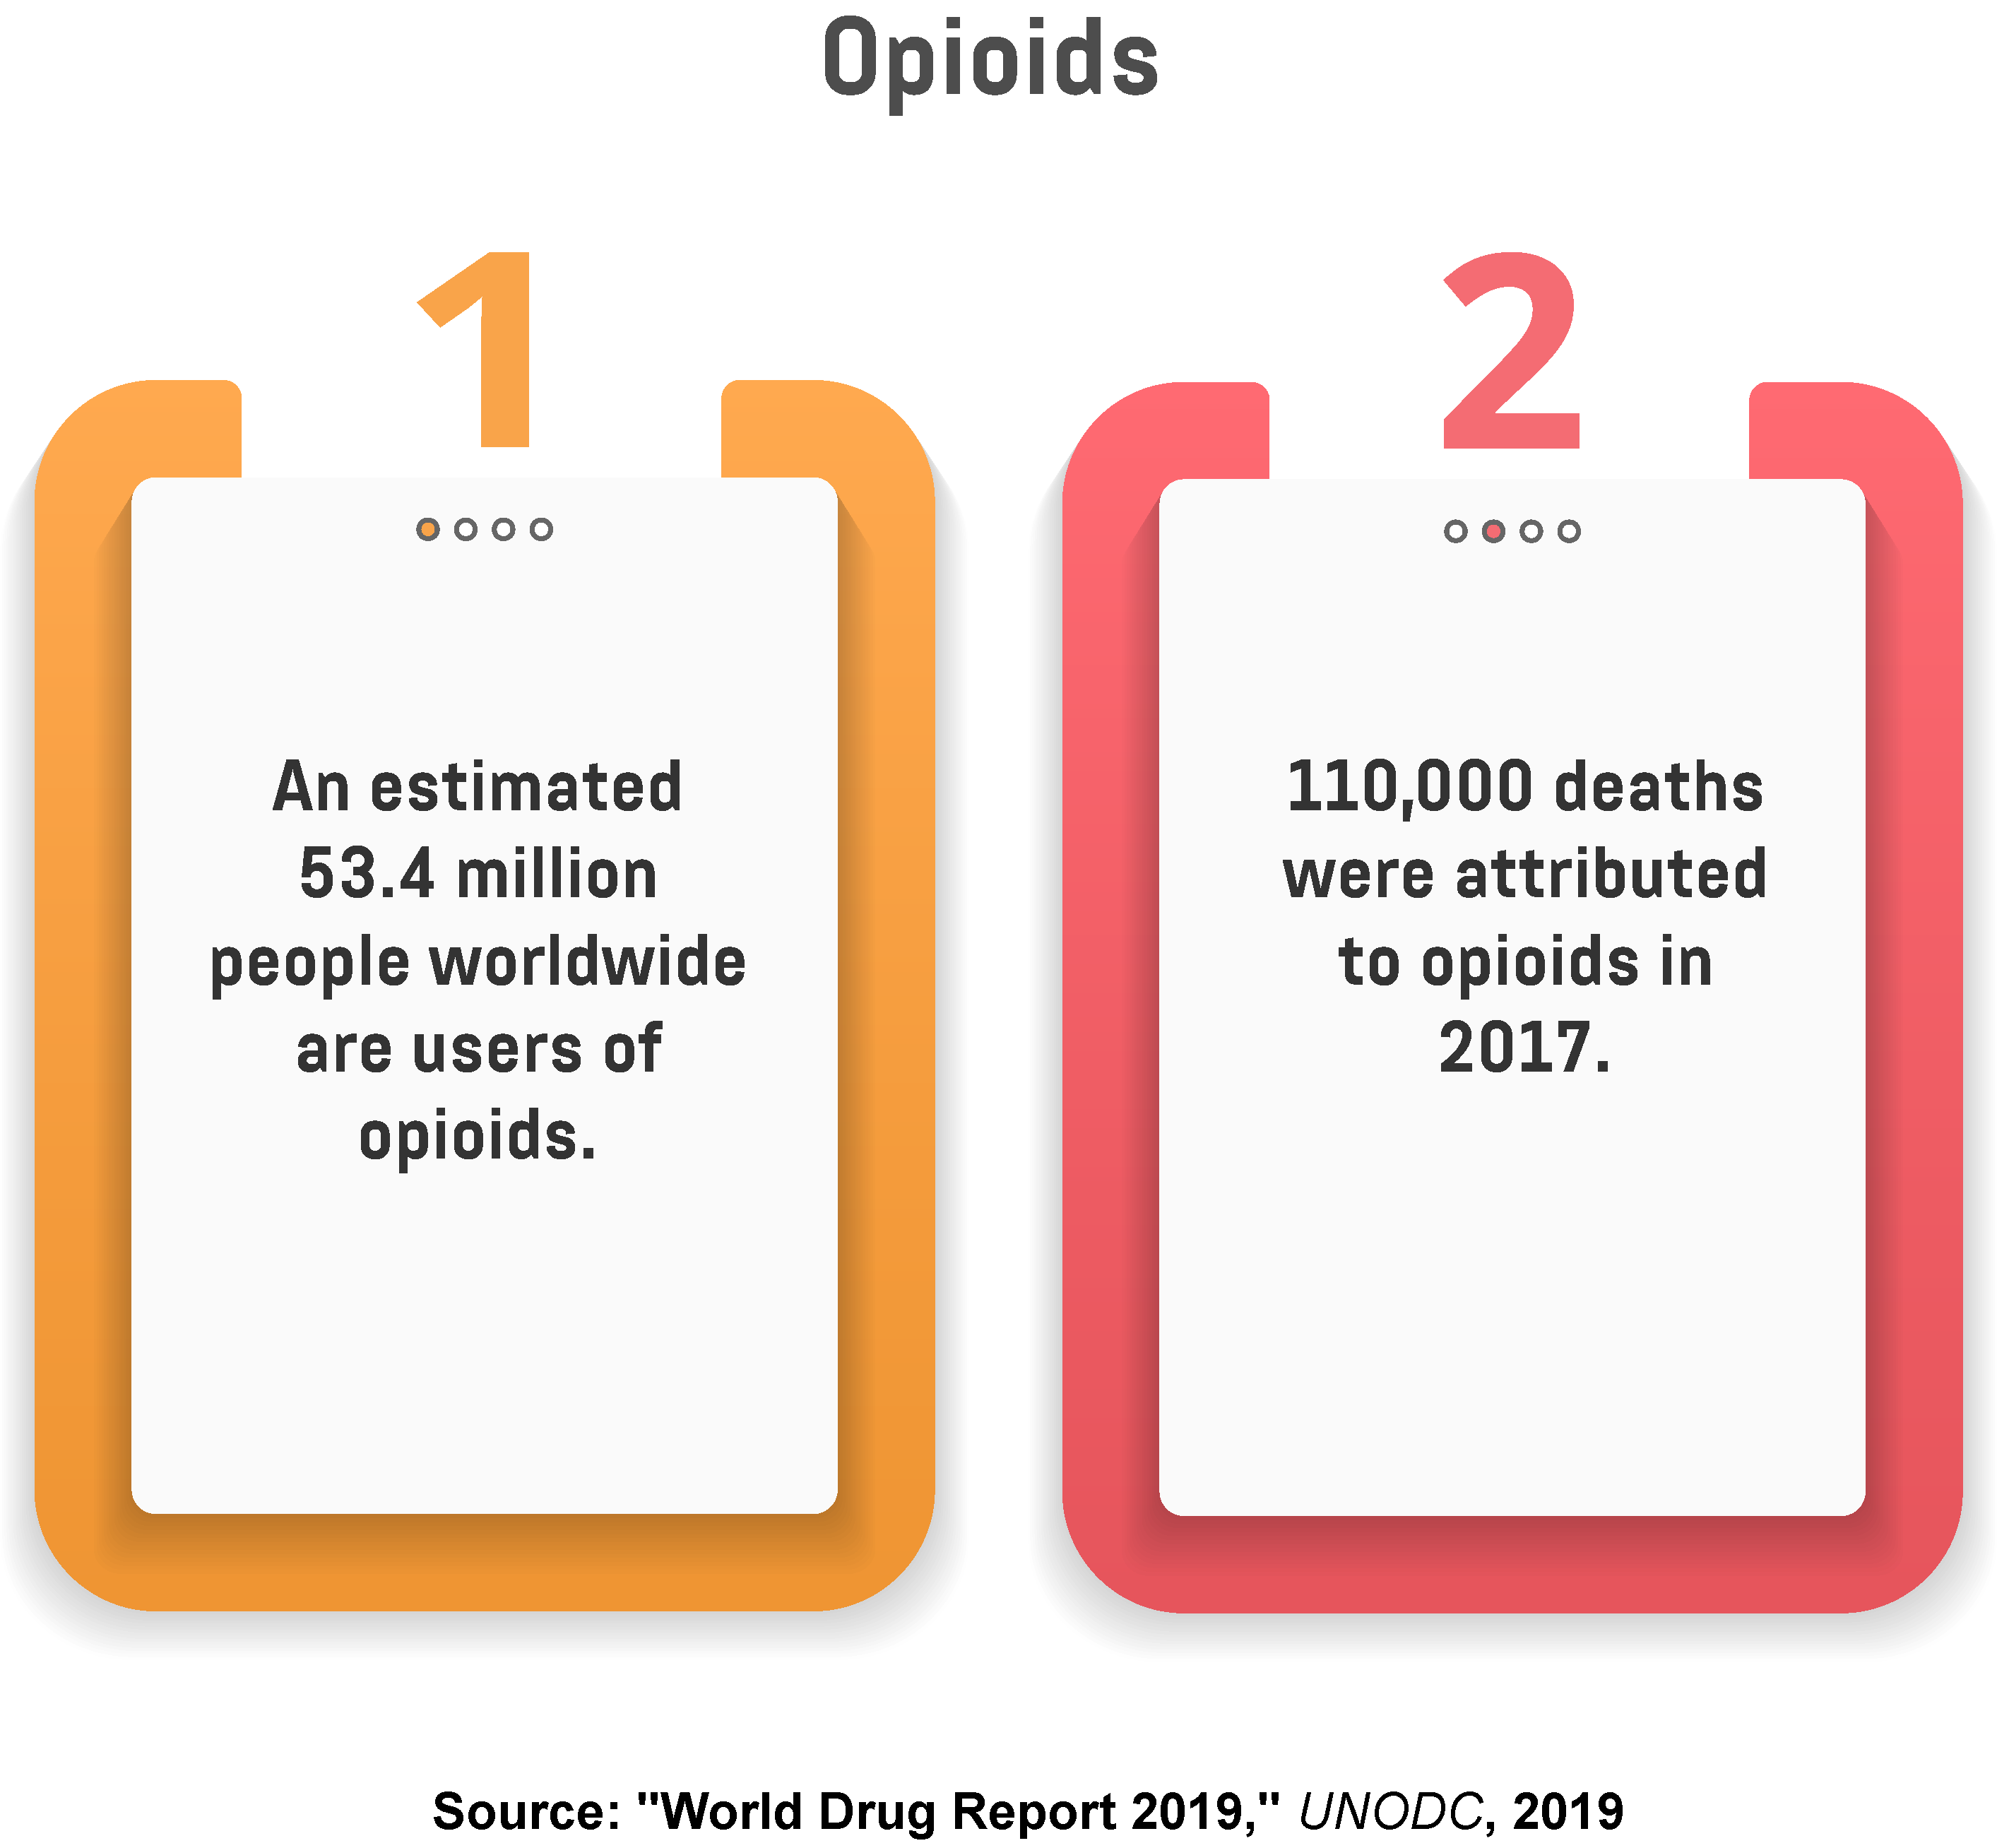  An infographic showing the number of people worldwide who used opioids, as well as the number of deaths opioids were responsible for in 2017.